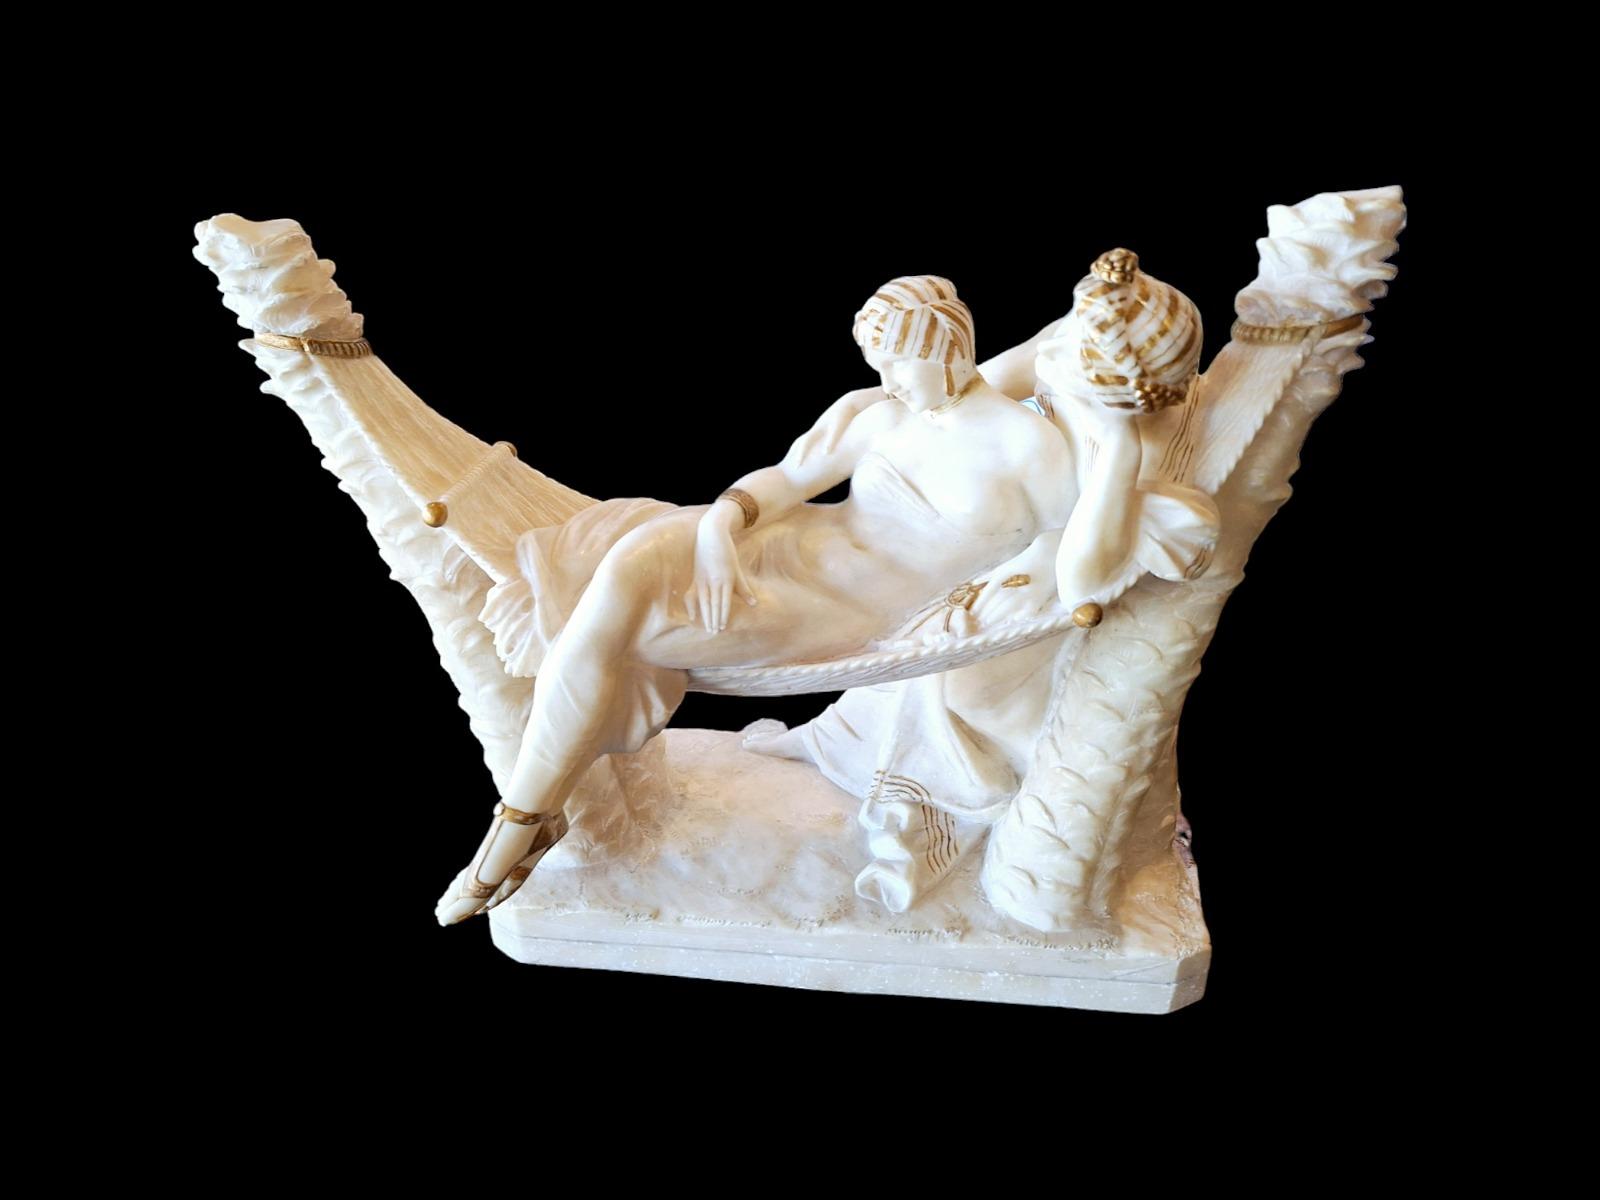 A high quality white marble sculpture.